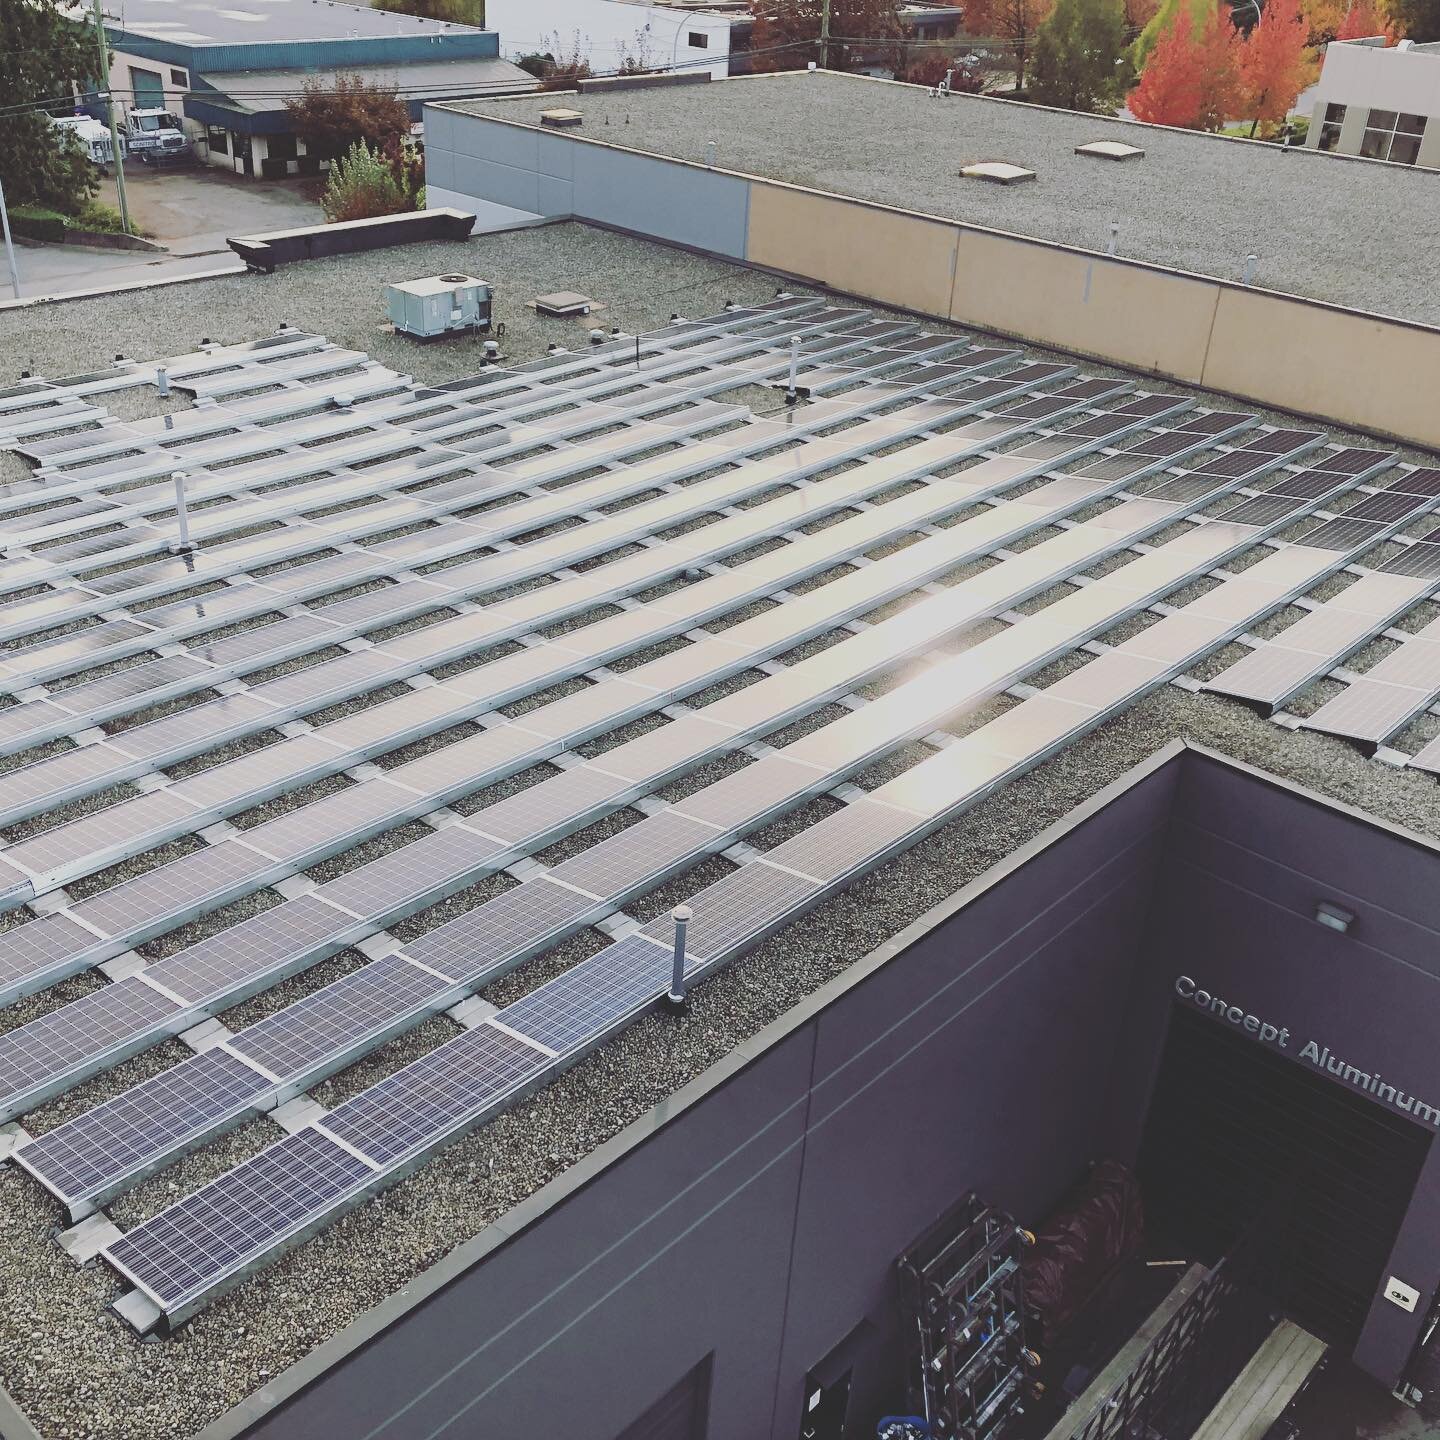 Cardero electric and Rikur energy recently completed this 192 panel 72kW ballasted system. Using @solaredgepv SE20K inverters this system can push over 100Amps three phase back to BC hydro. Concept Aluminum Products is now one of the first buildings 